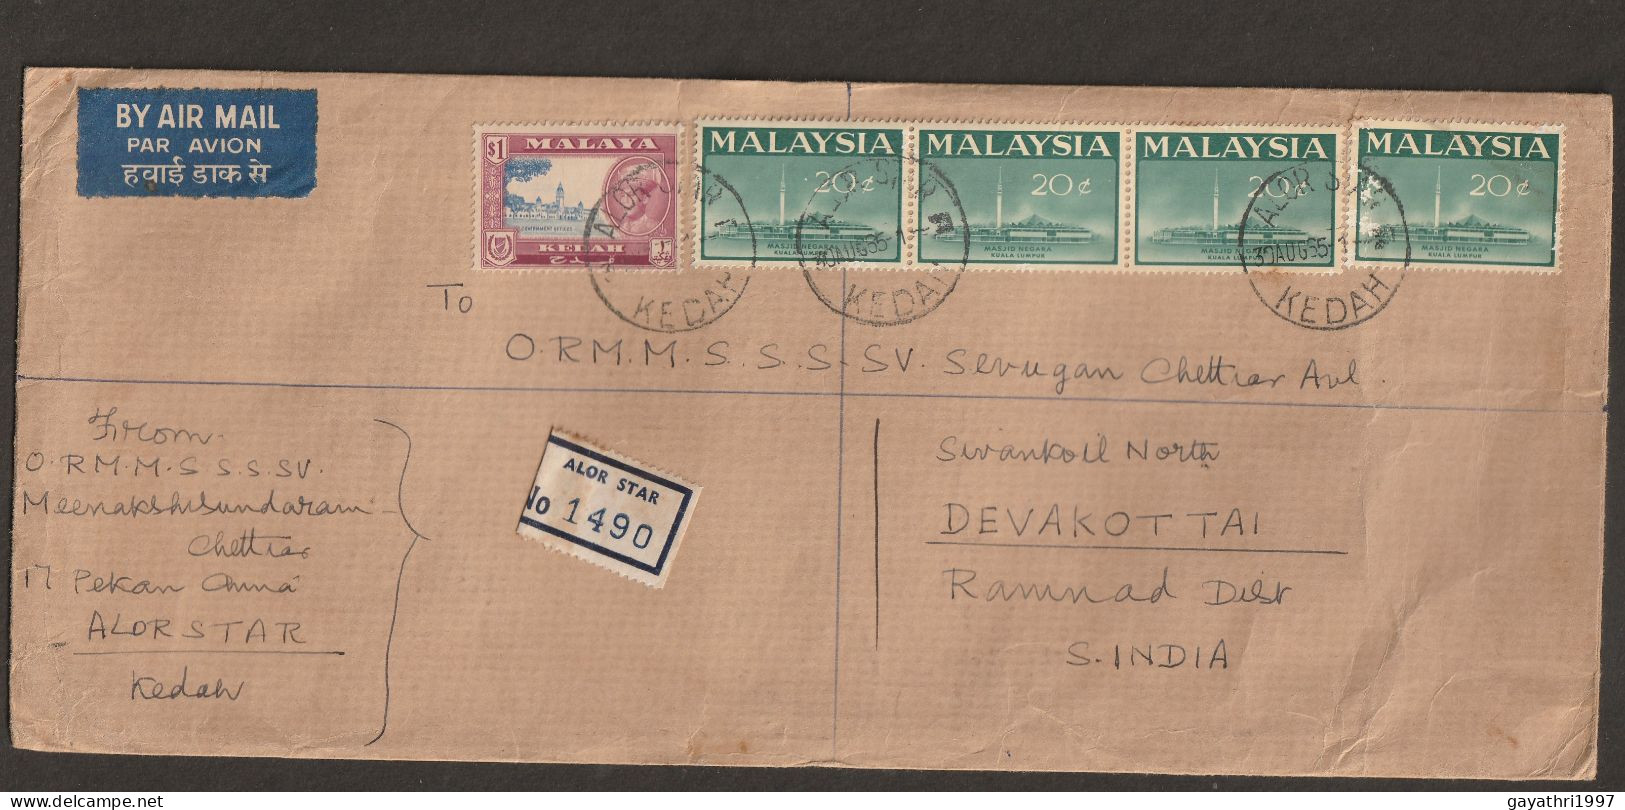 Malaya 1965 Malaya Stamp And Kedah Stamp Combined Used From Malaya To India Long Cover High Value Stamp(L19) - Kedah